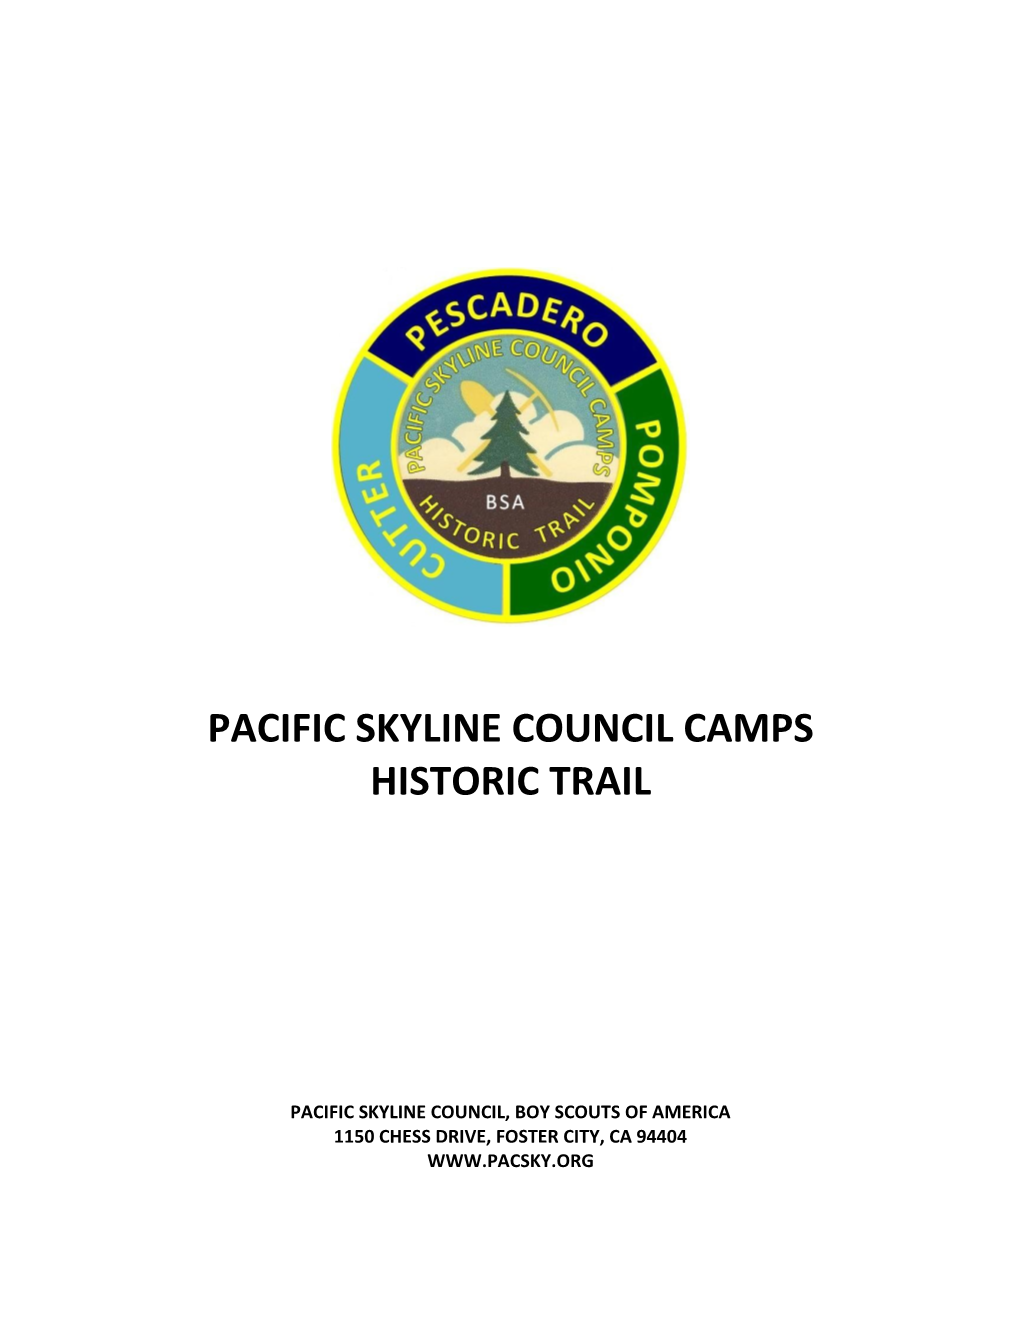 Pacific Skyline Council Camps Historic Trail